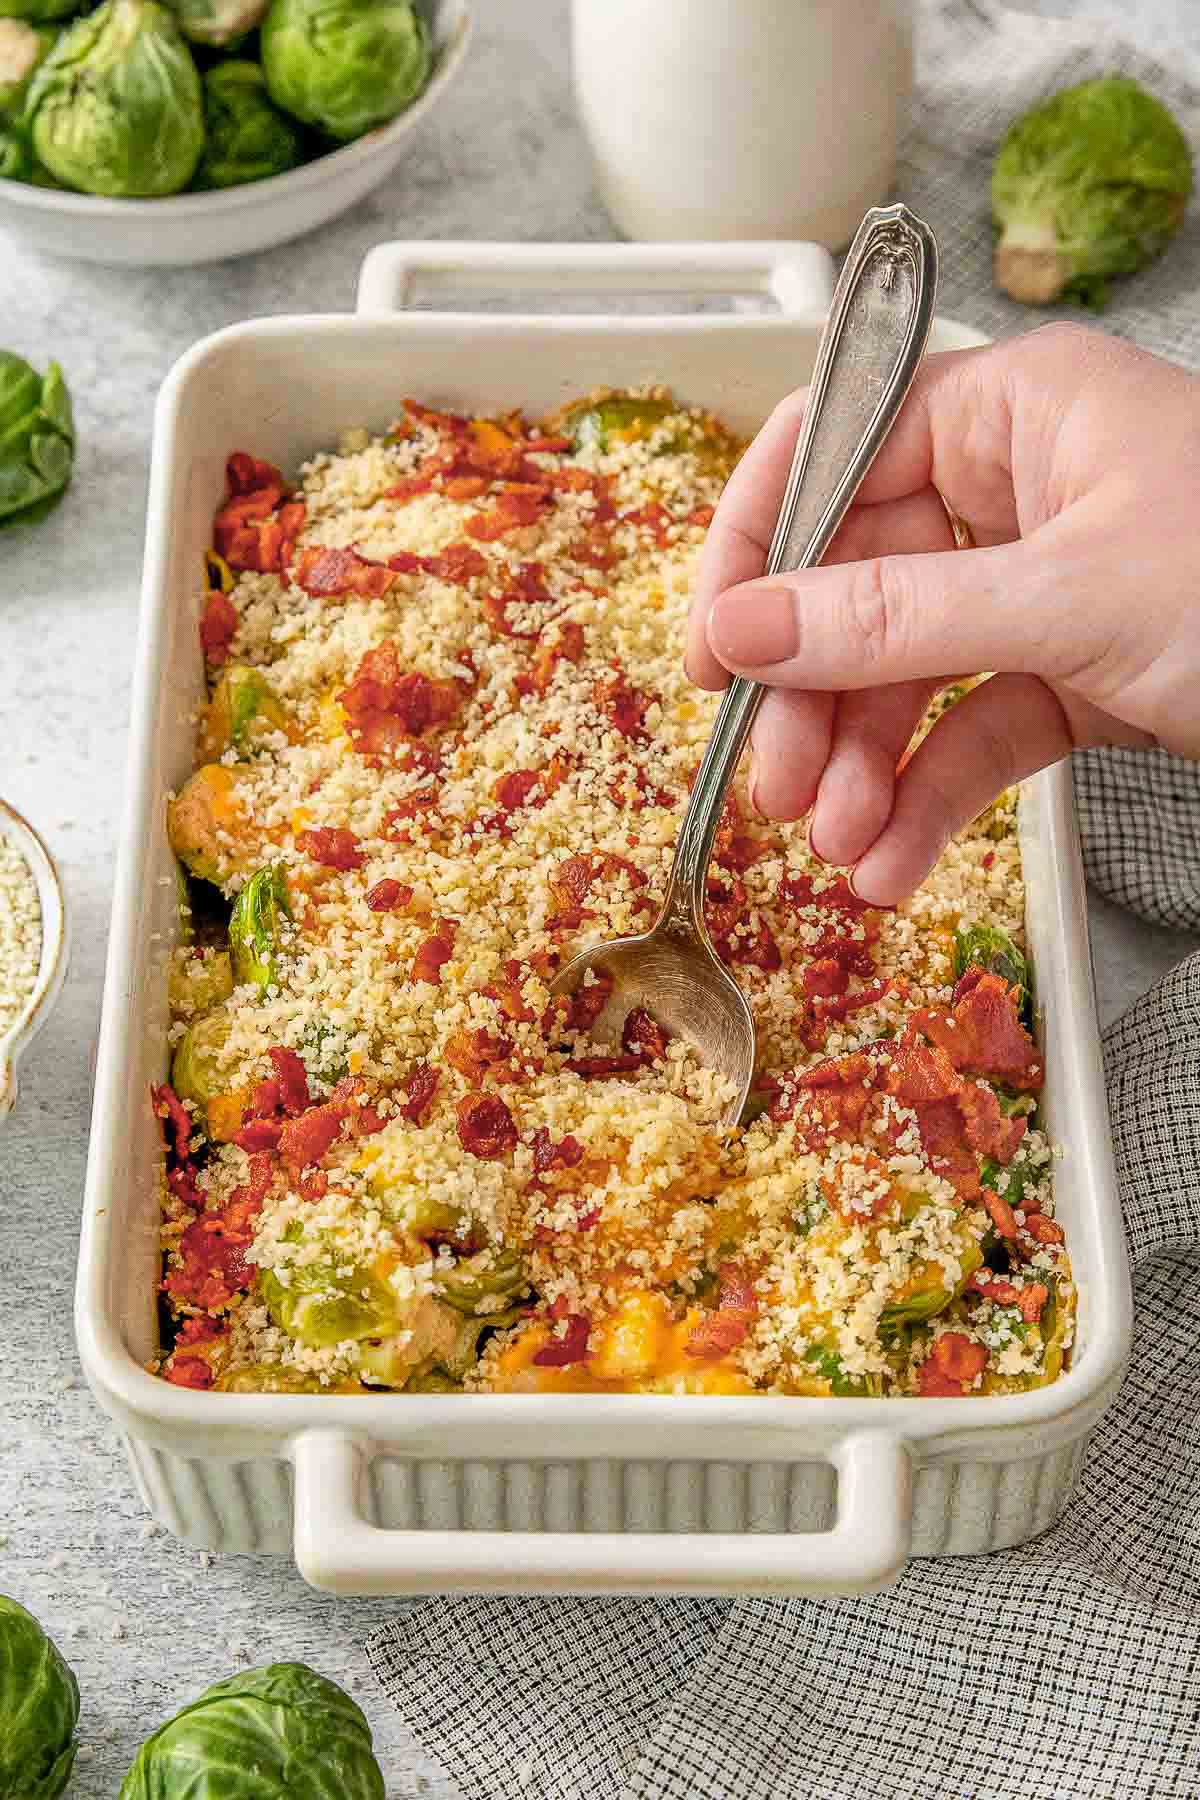 Brussels sprouts in a casserole dish with a spoon.Brussels sprout casserole in a large white baking dish topped with breadcrumbs with woman holding a spoon inserted into dish.